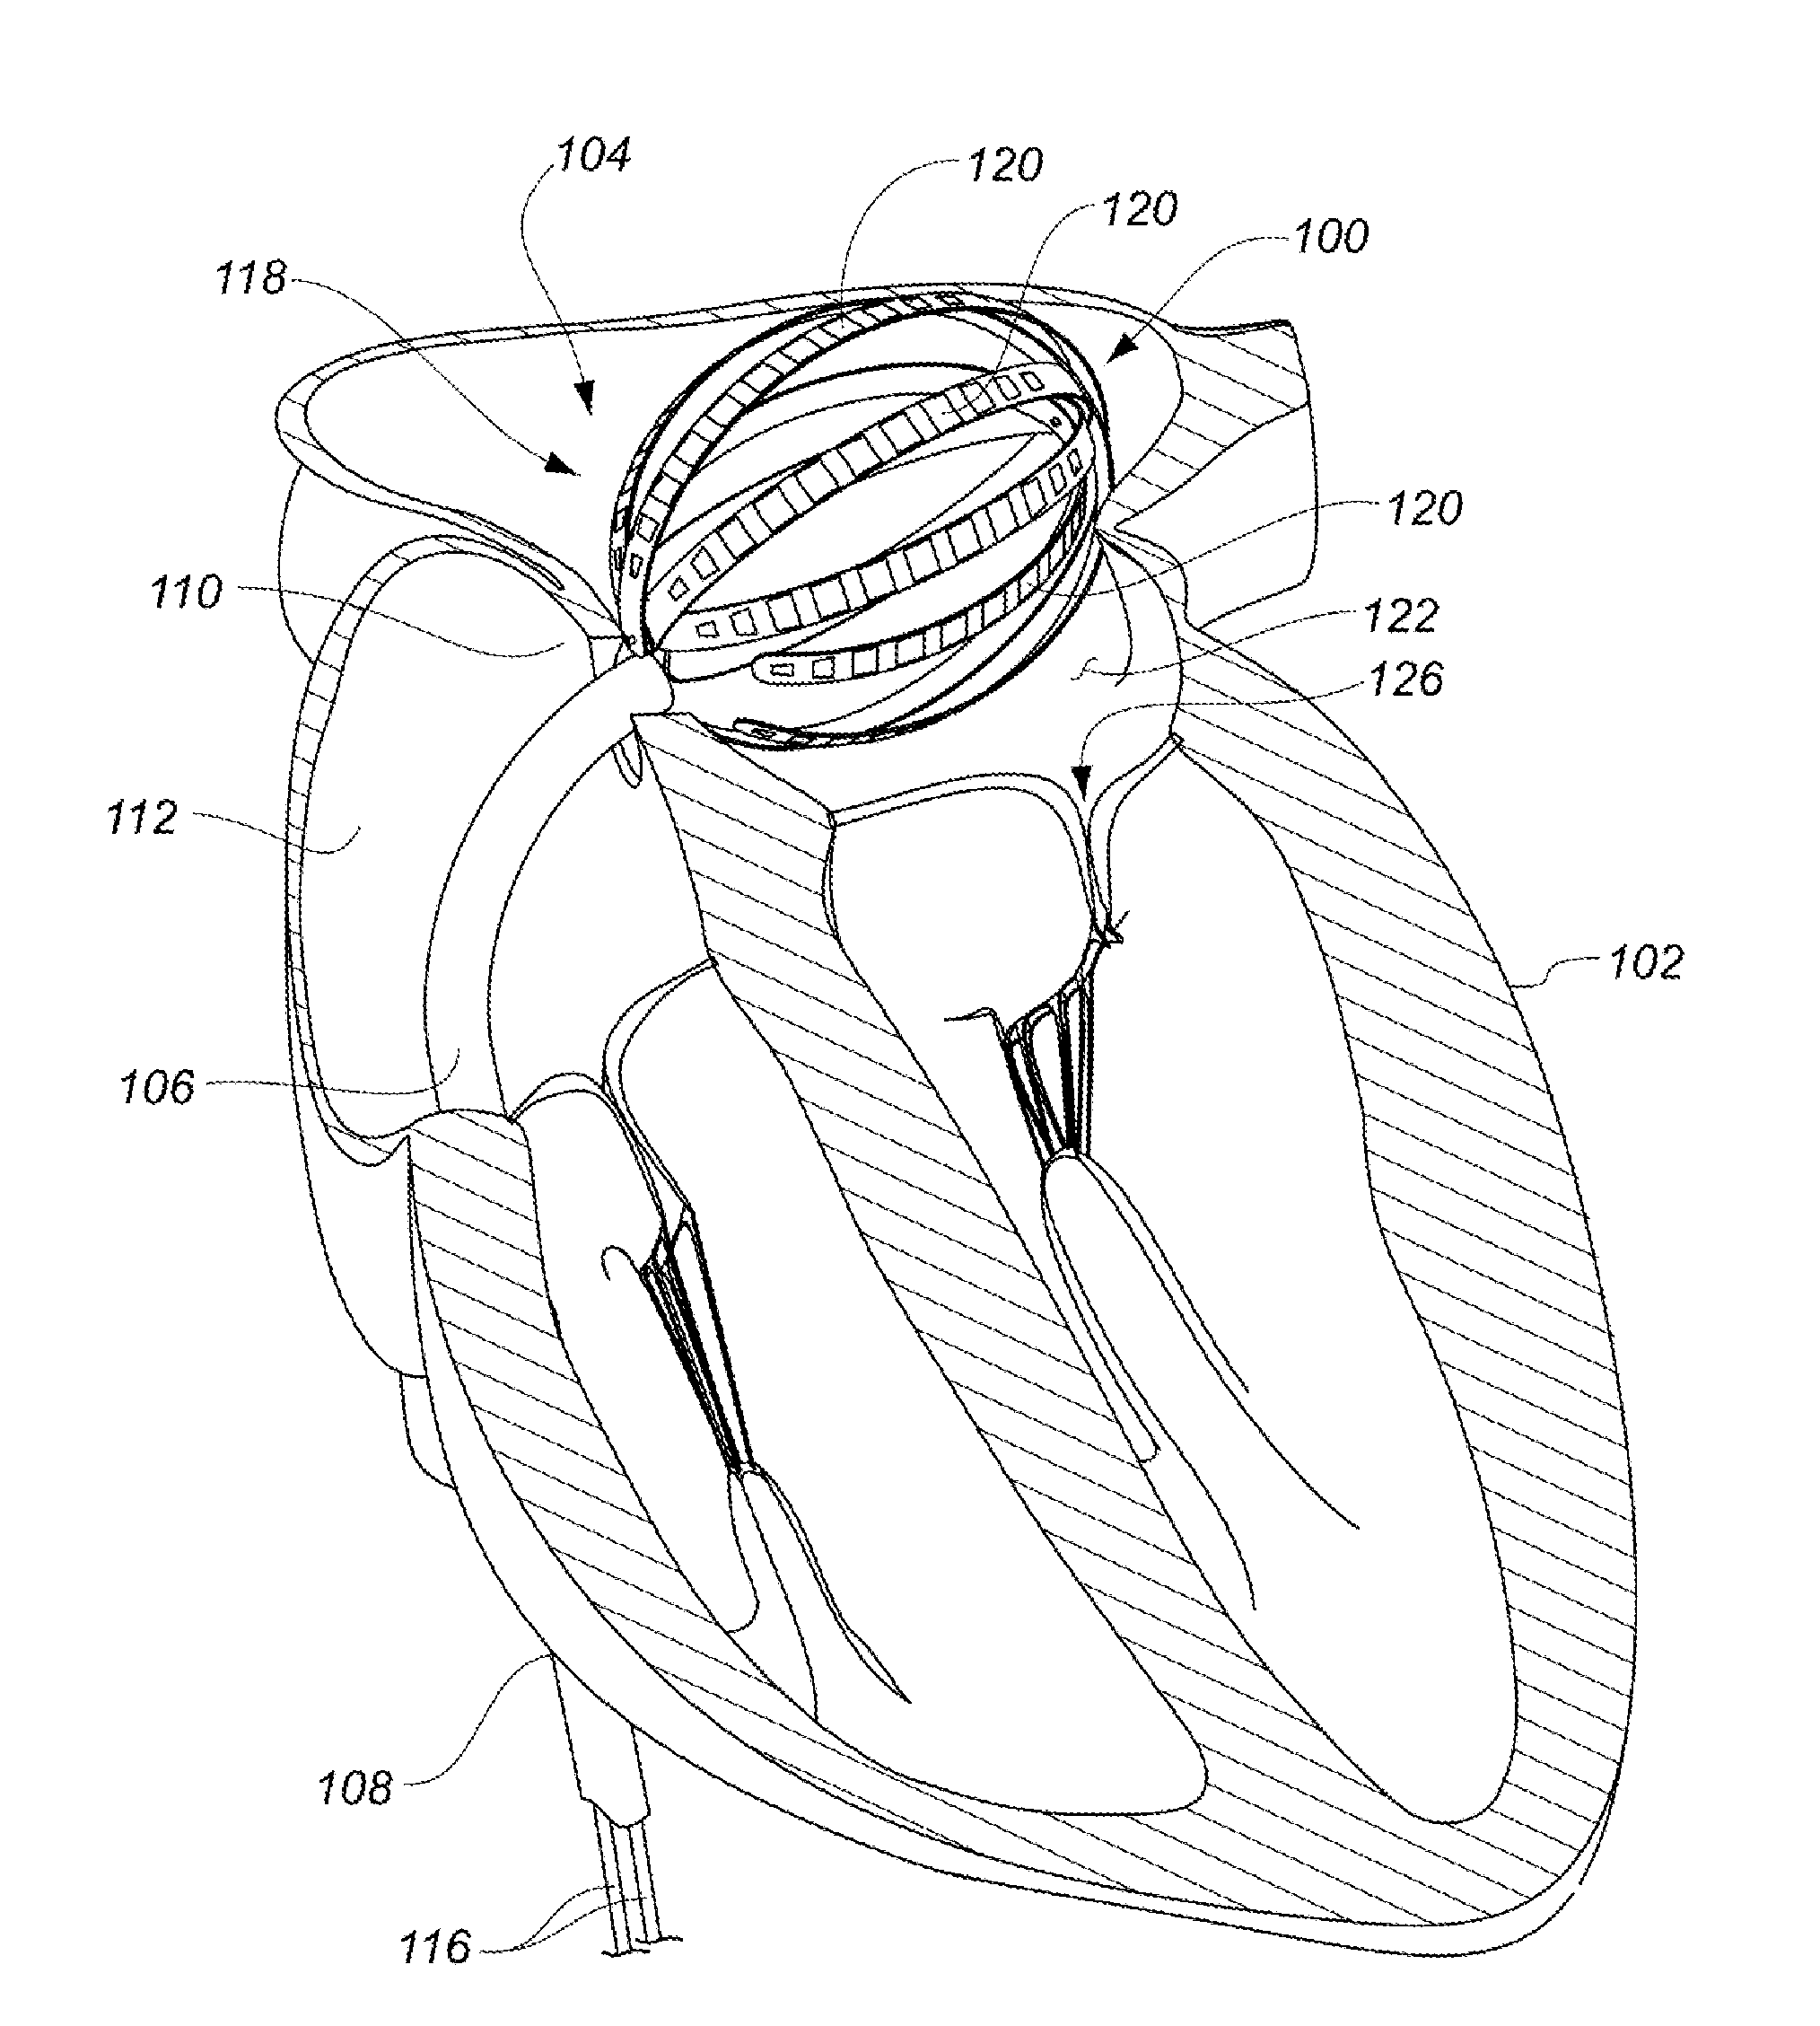 Enhanced medical device for use in bodily cavities, for example an atrium